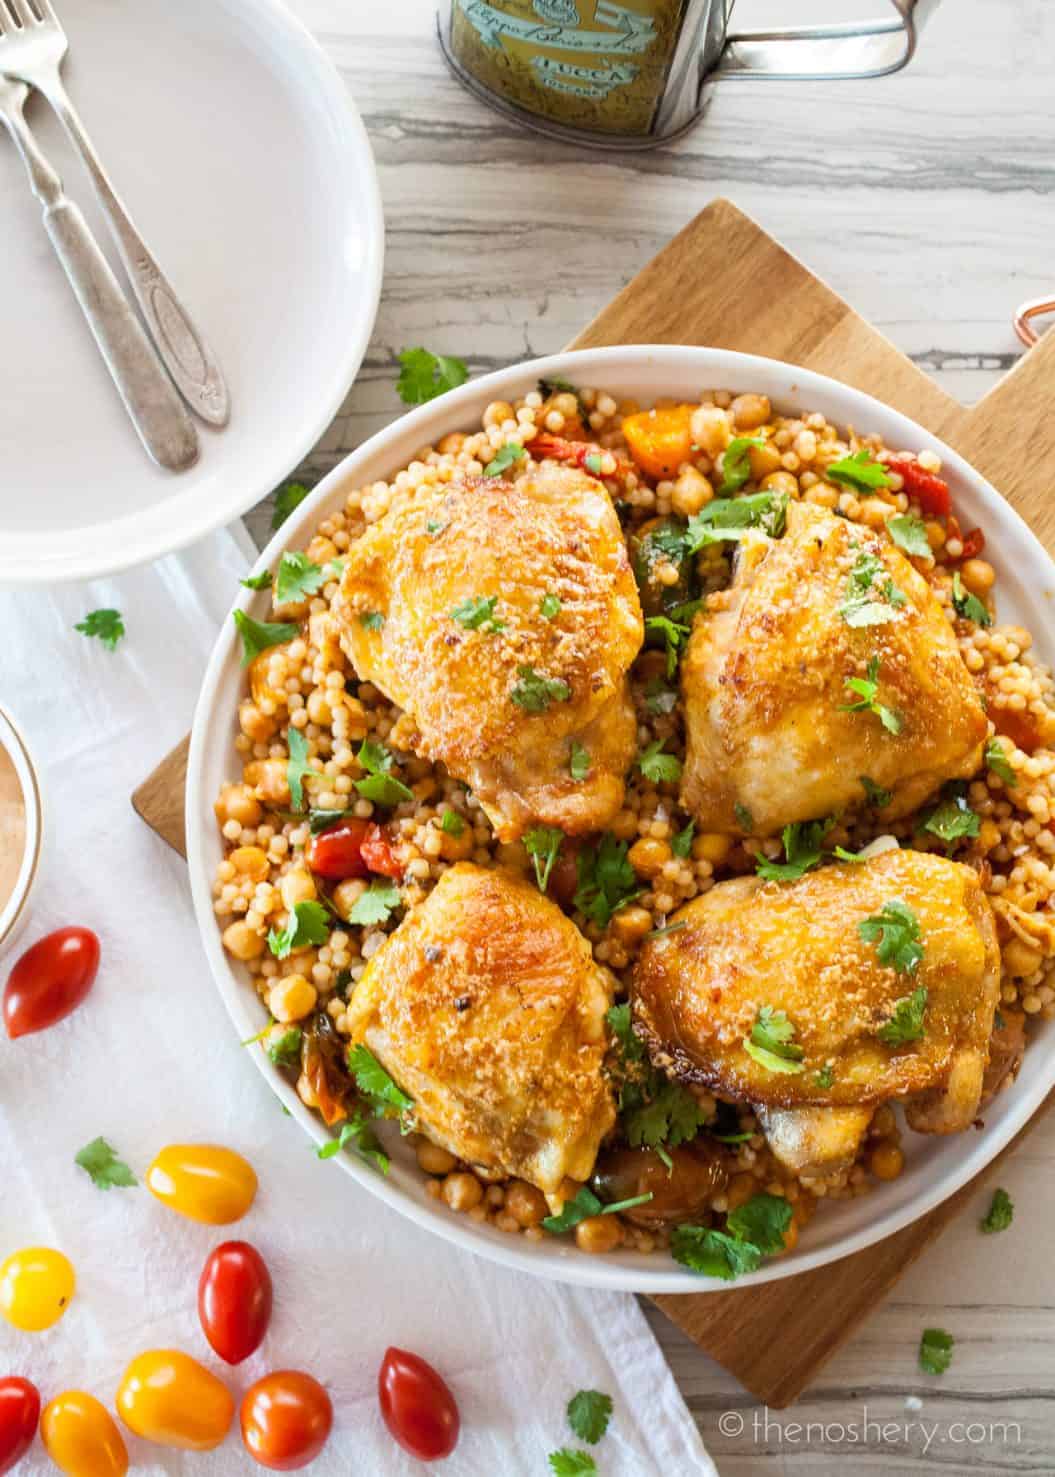 Paprika Chicken with Israeli Couscous Chickpea Salad - The Noshery